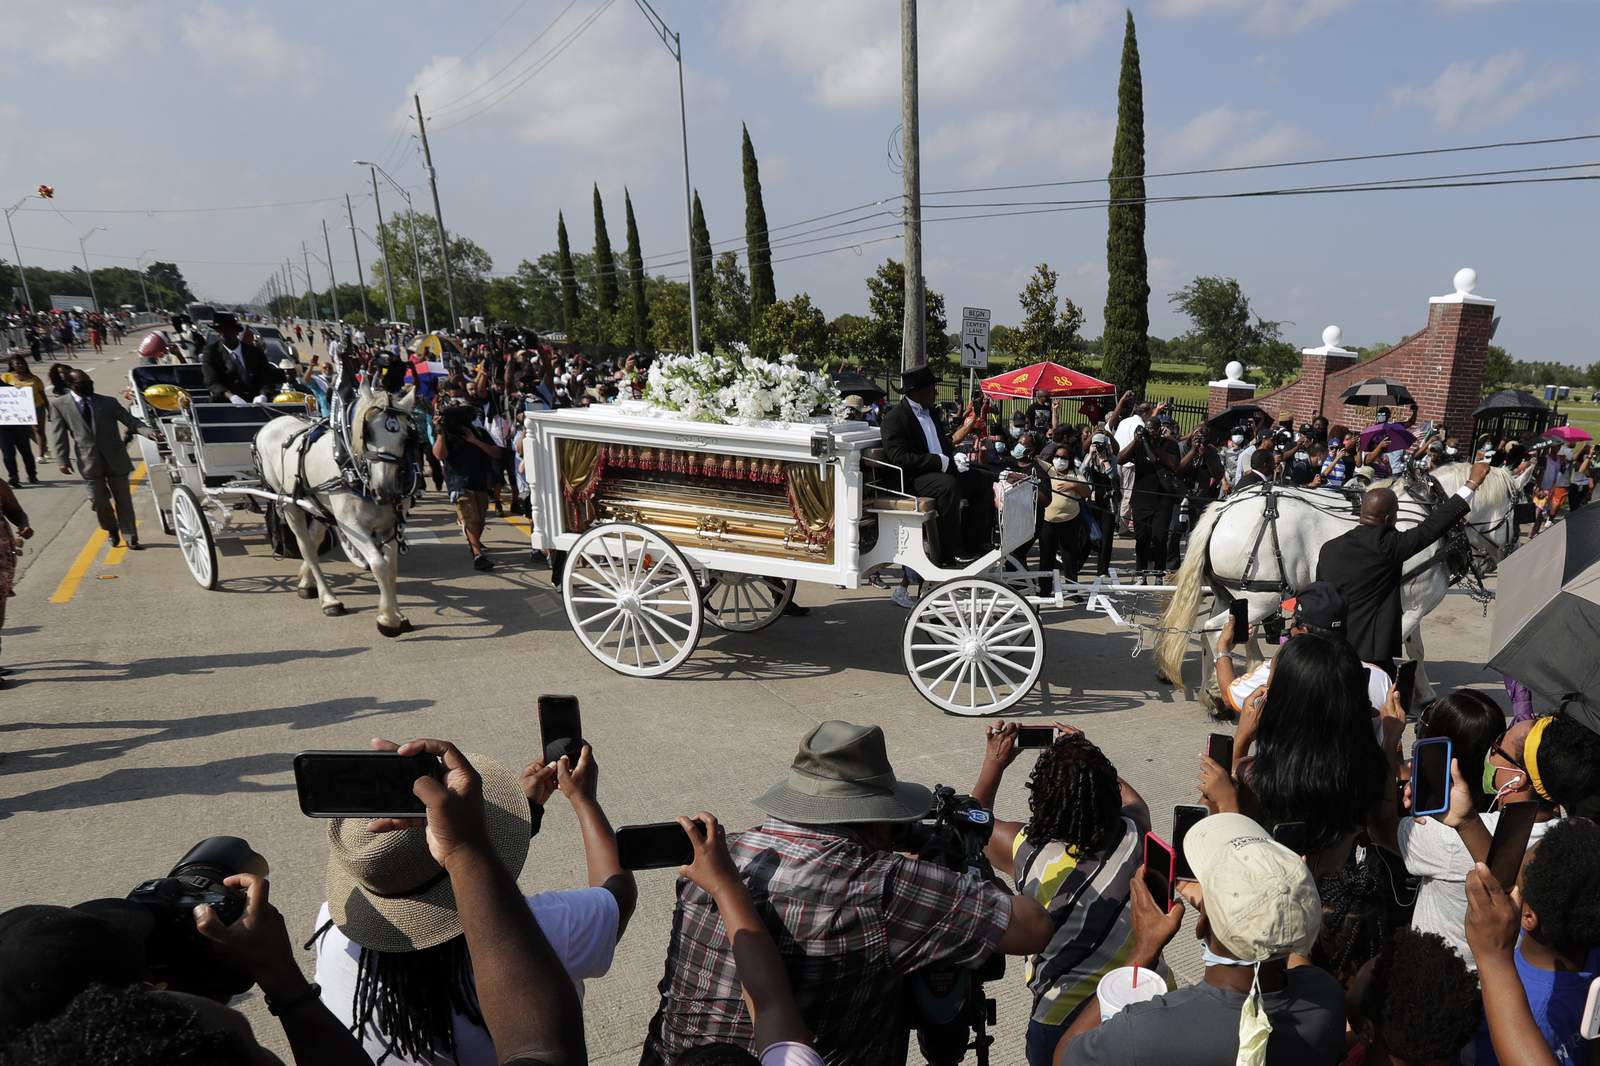 Documents show large police presence at George Floyd burial